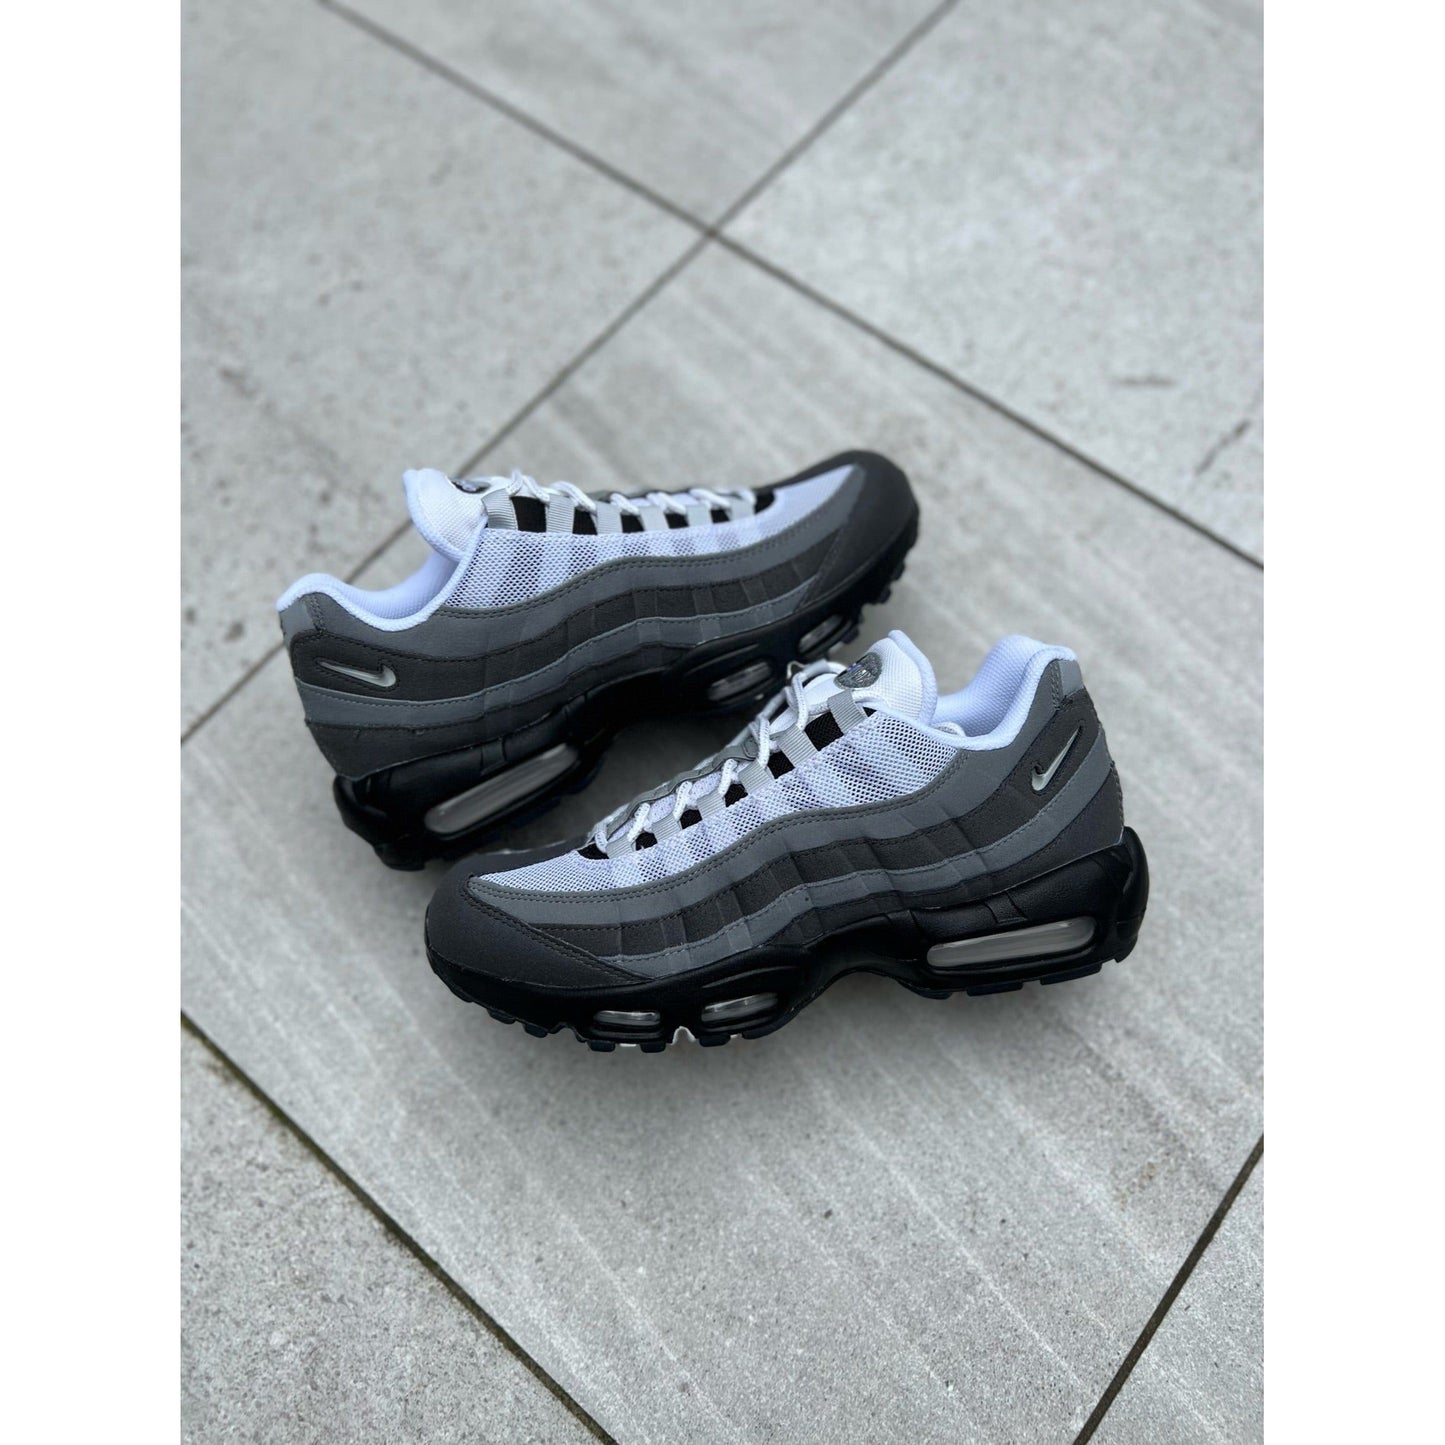 Nike Air Max 95 Jewel Swoosh Grey by Nike from £250.00